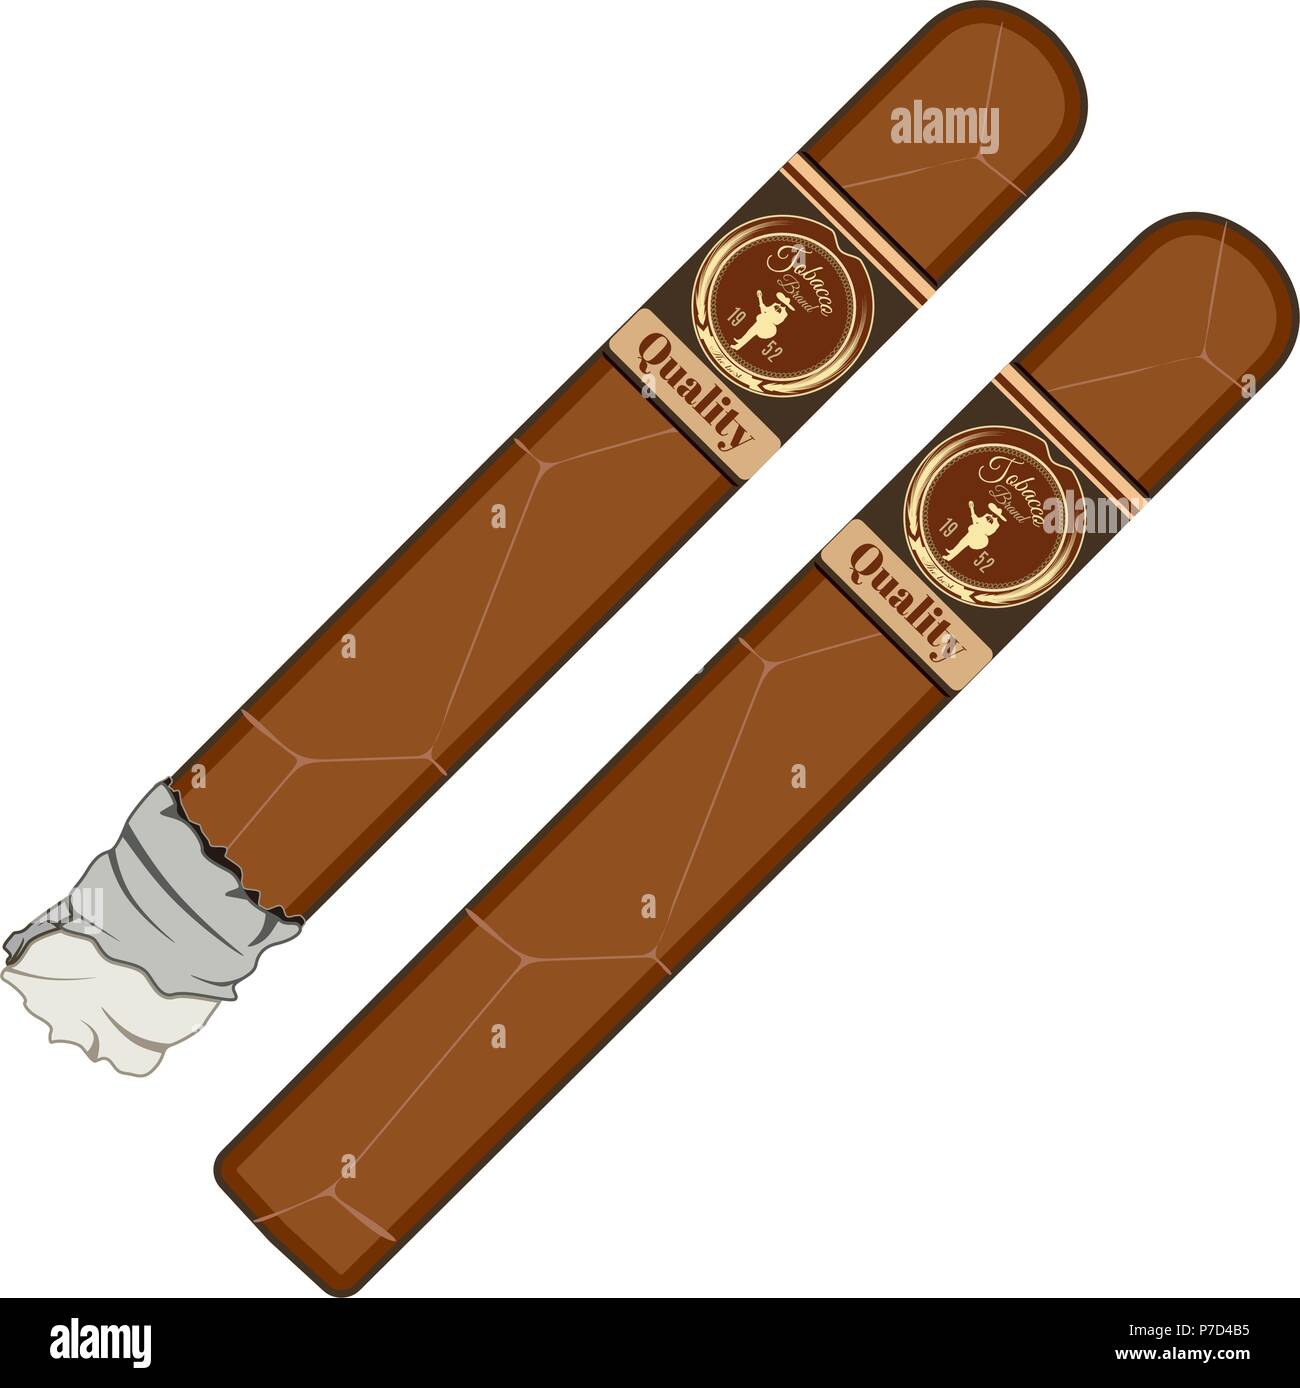 Vector illustration of cuban cigars with labels isolated on white background. Flat style design. Stock Vector